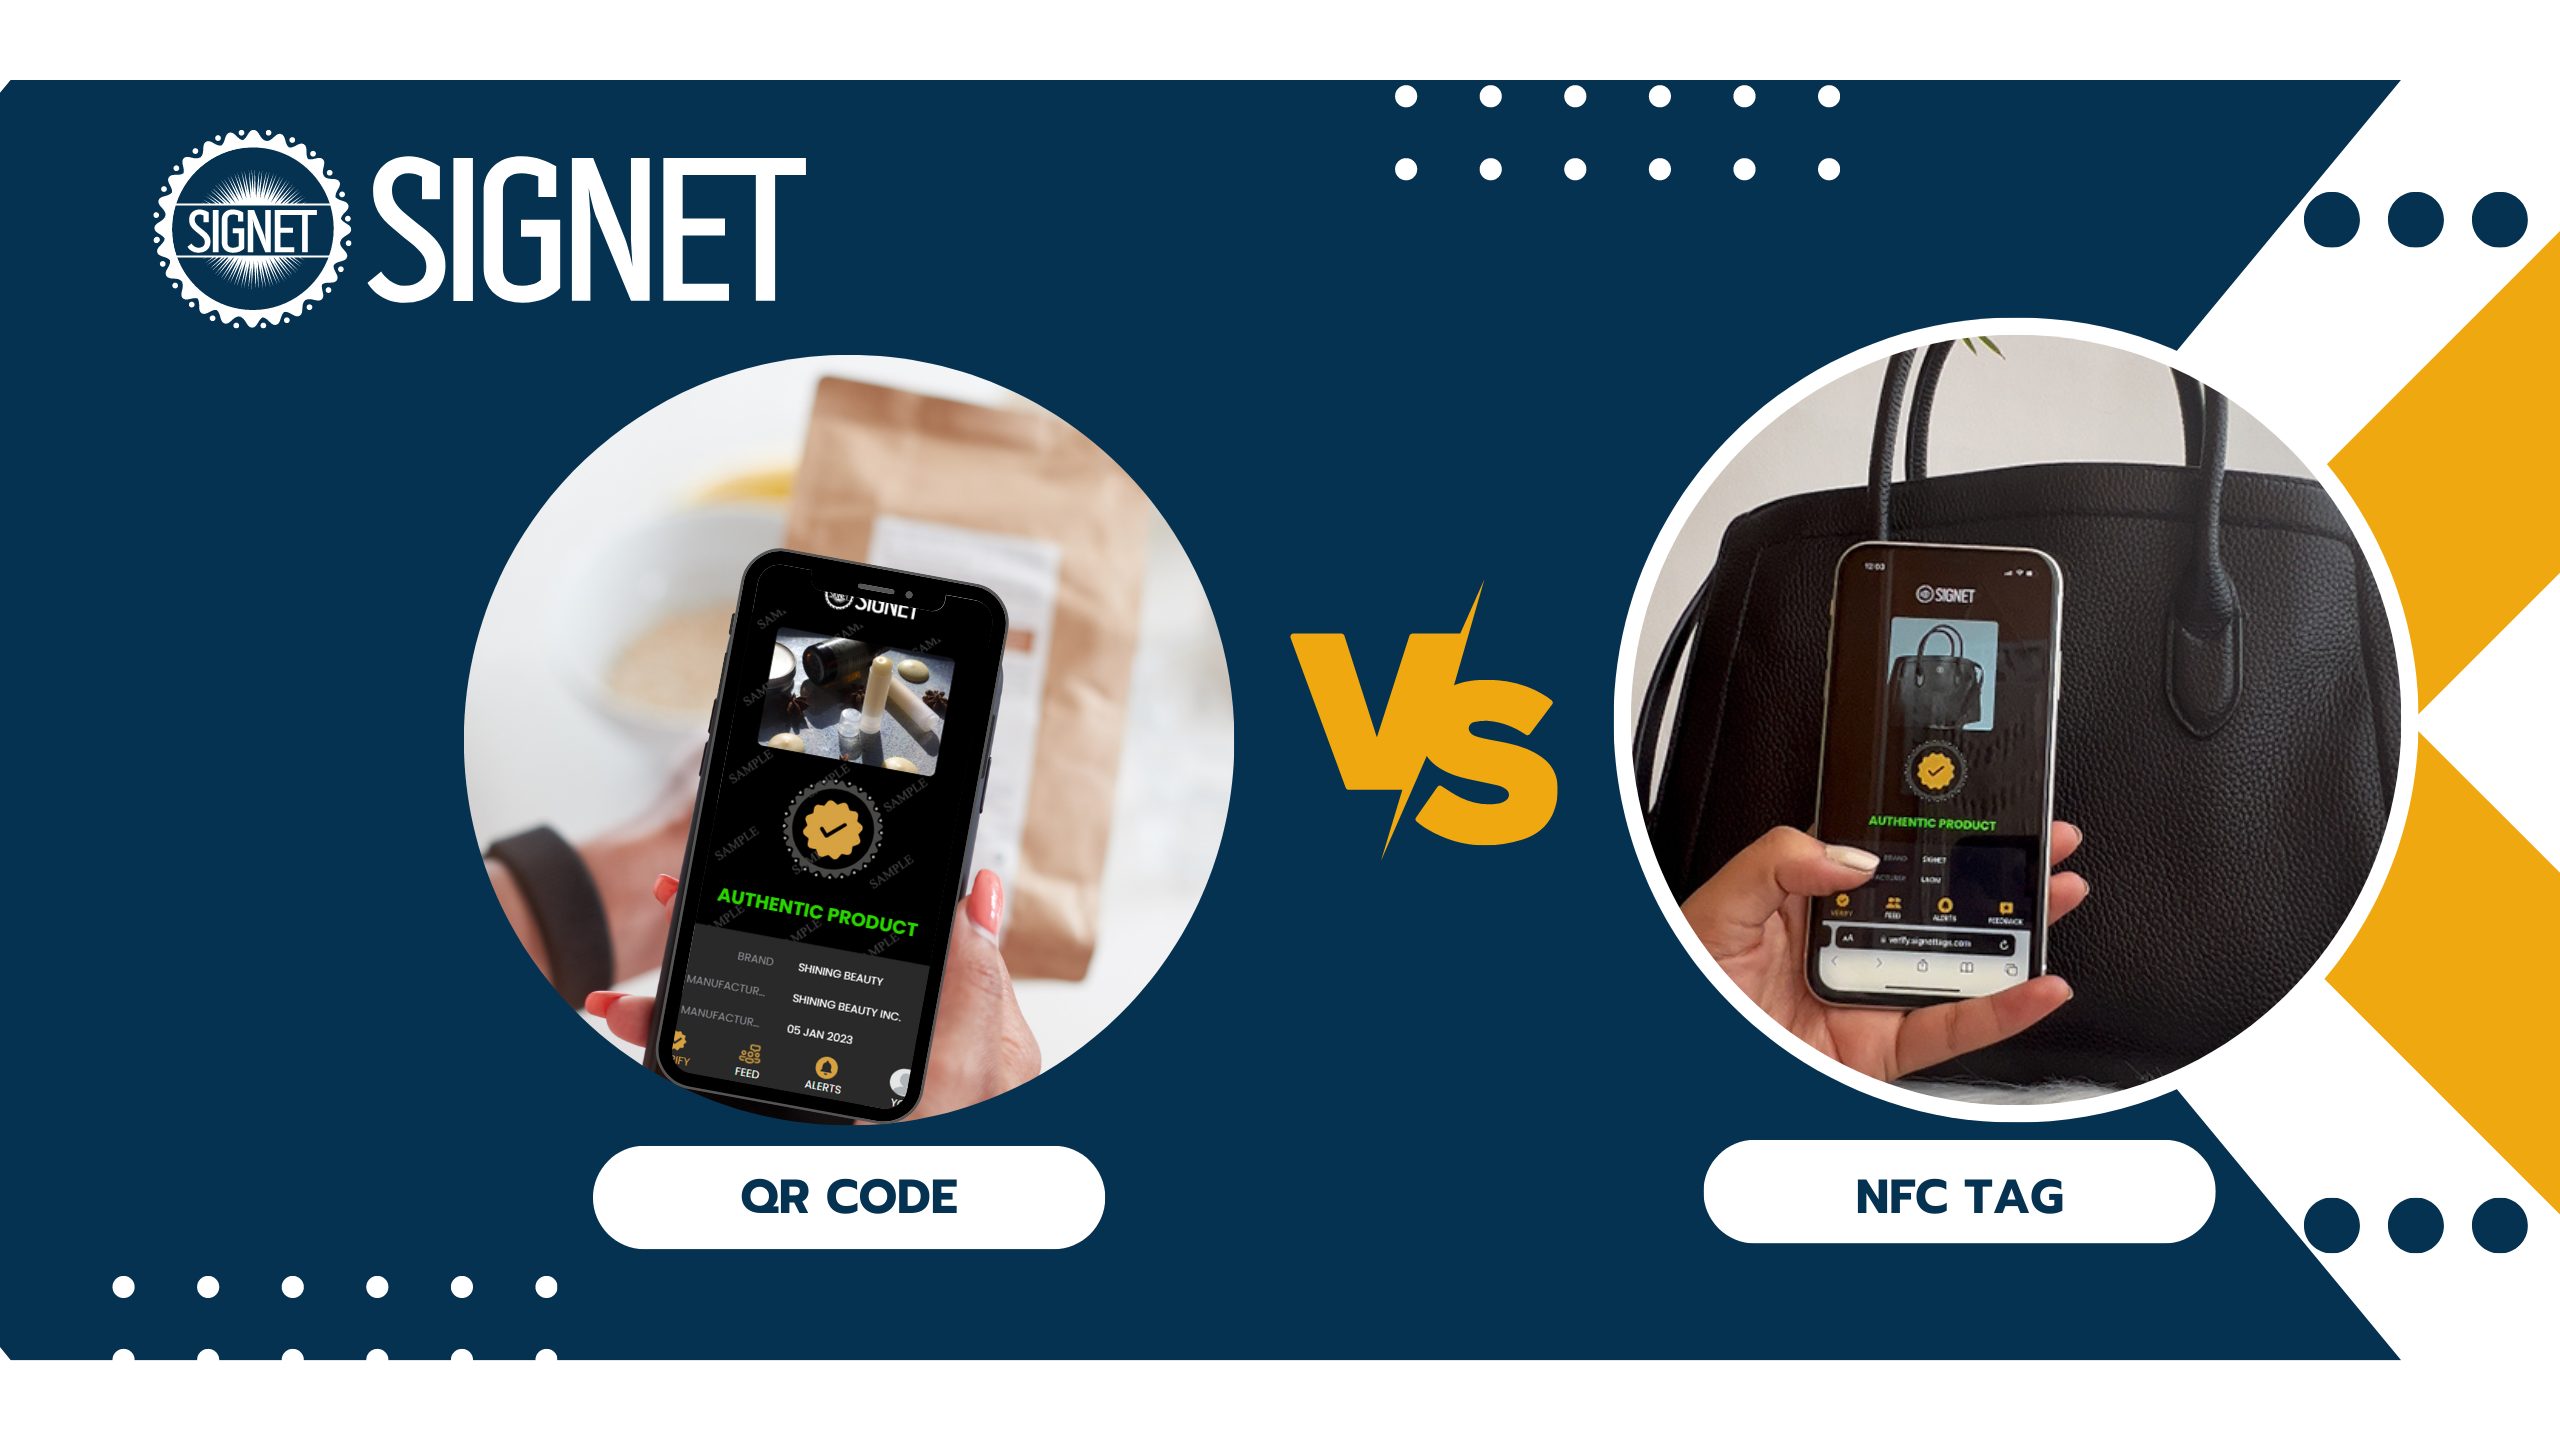 Benefits of using NFC tag and QR codes for digital loyalty programs.